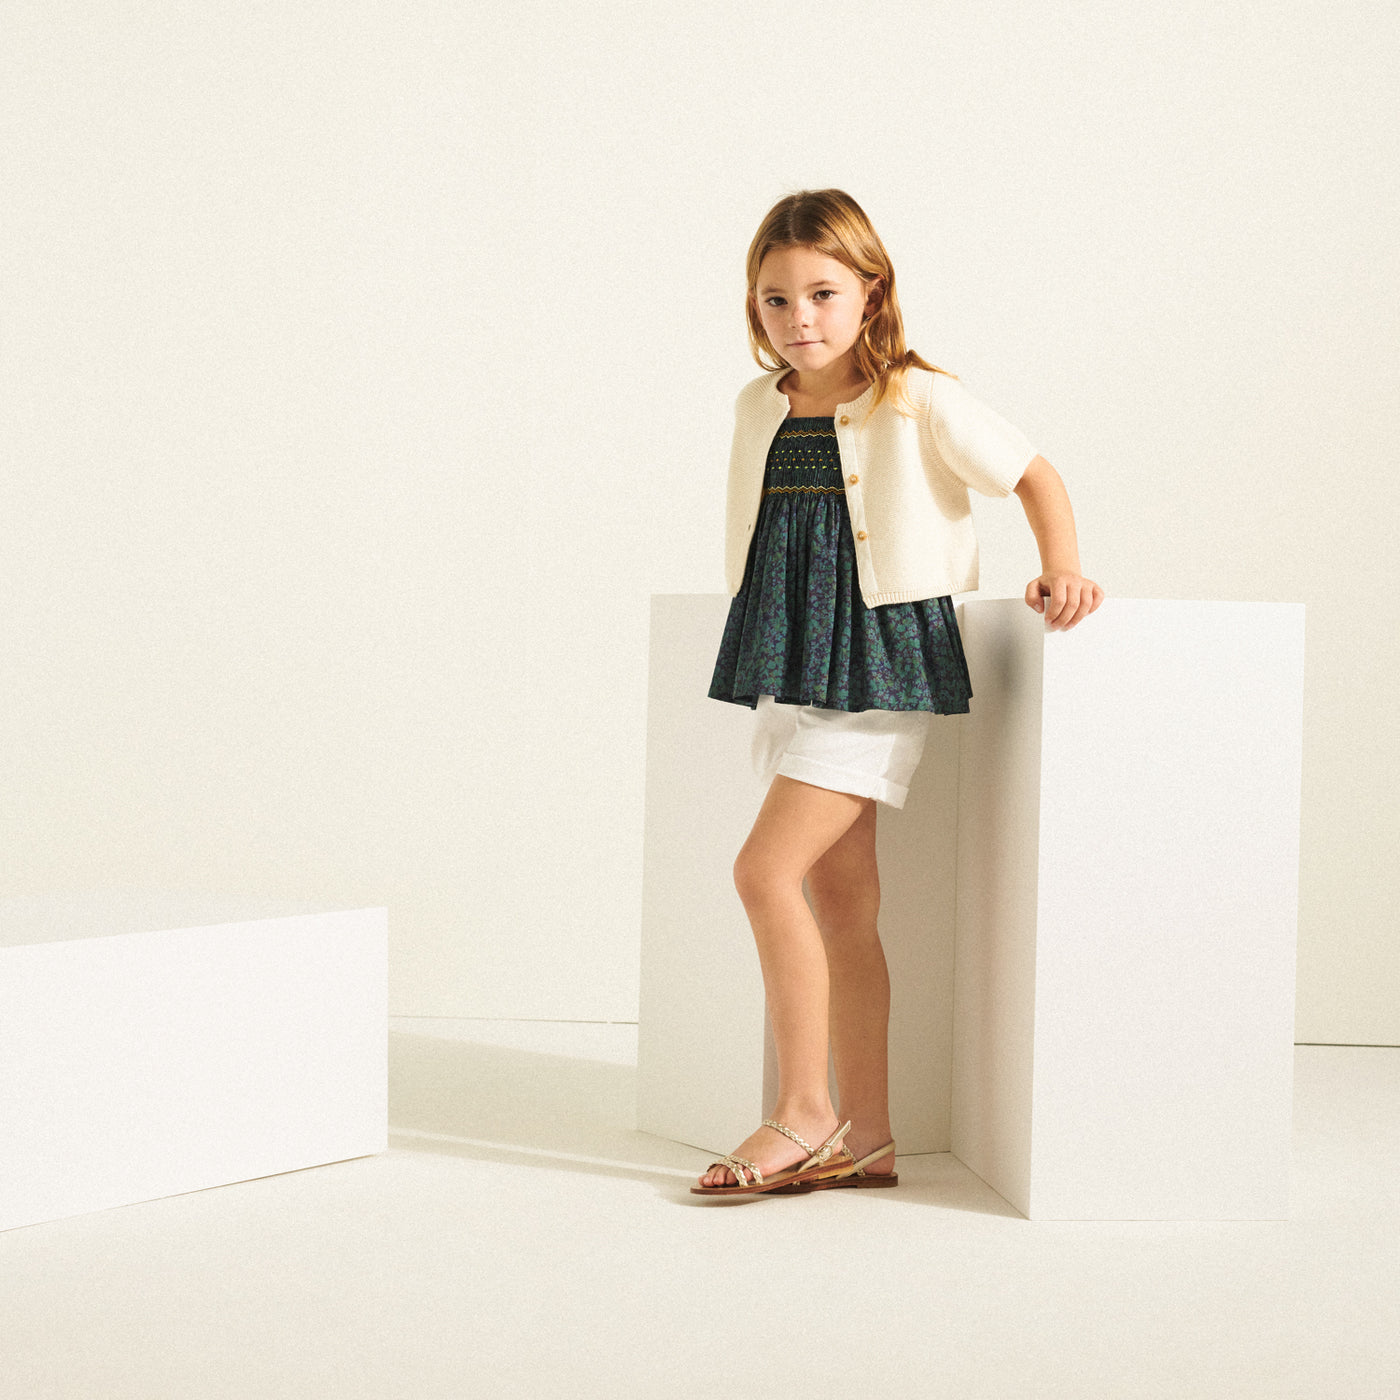 Girl posing in dark blouse with cream cardigan from Bonpoint Spring Summer 2022 Collection